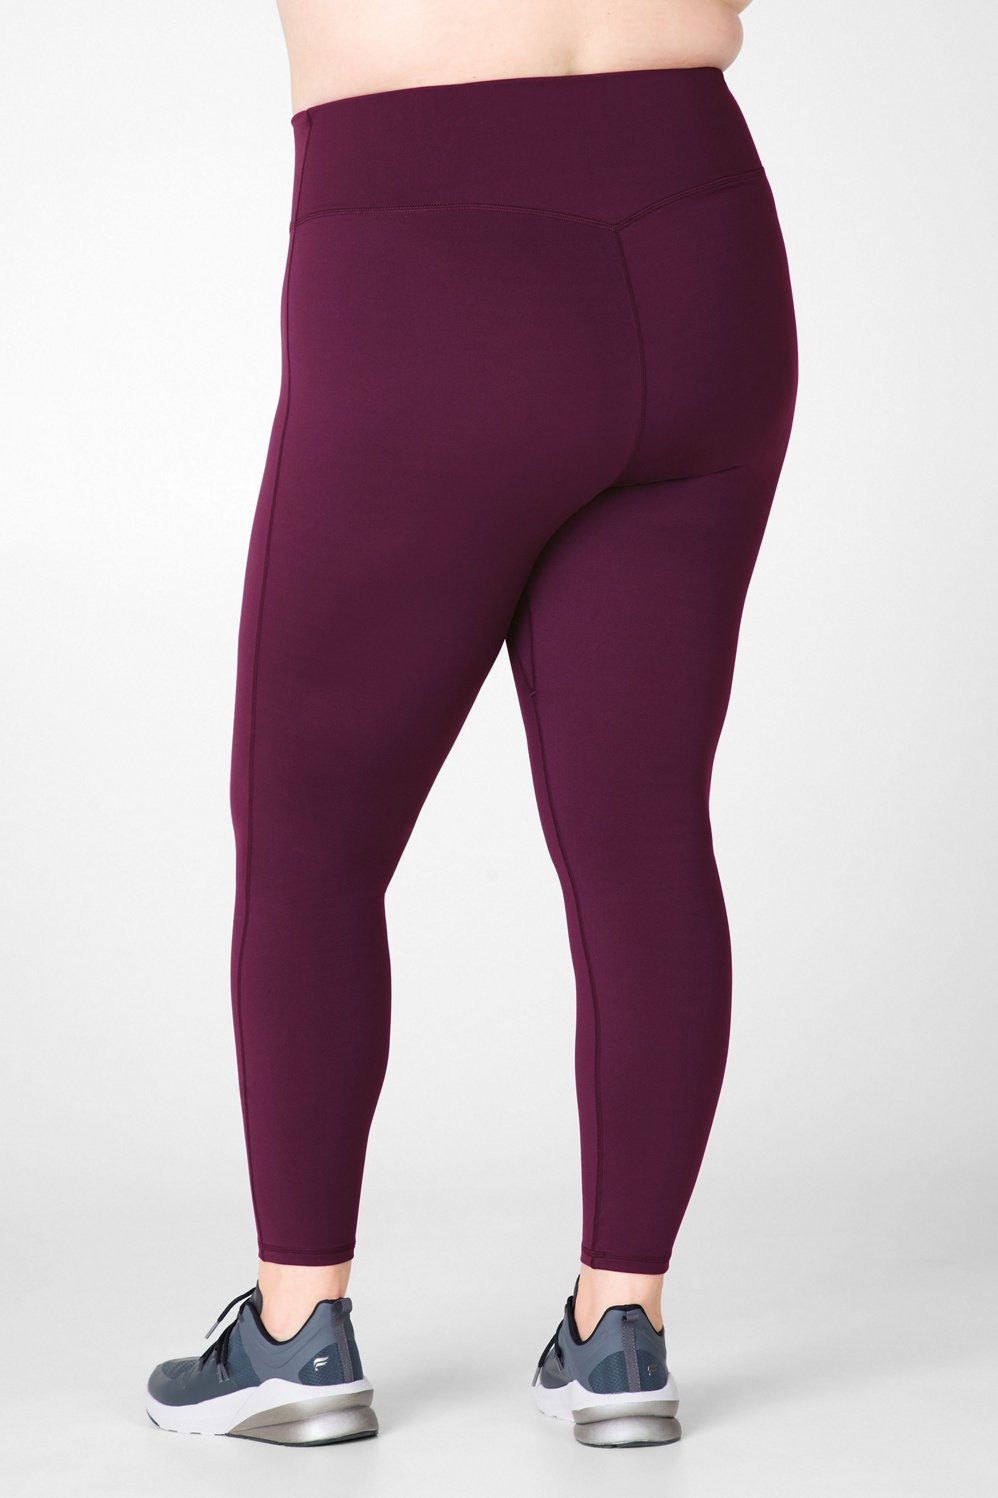 Women's High-Waisted Cozy Ribbed Lounge Flare Leggings - Wild Fable  Burgundy M - Simpson Advanced Chiropractic & Medical Center